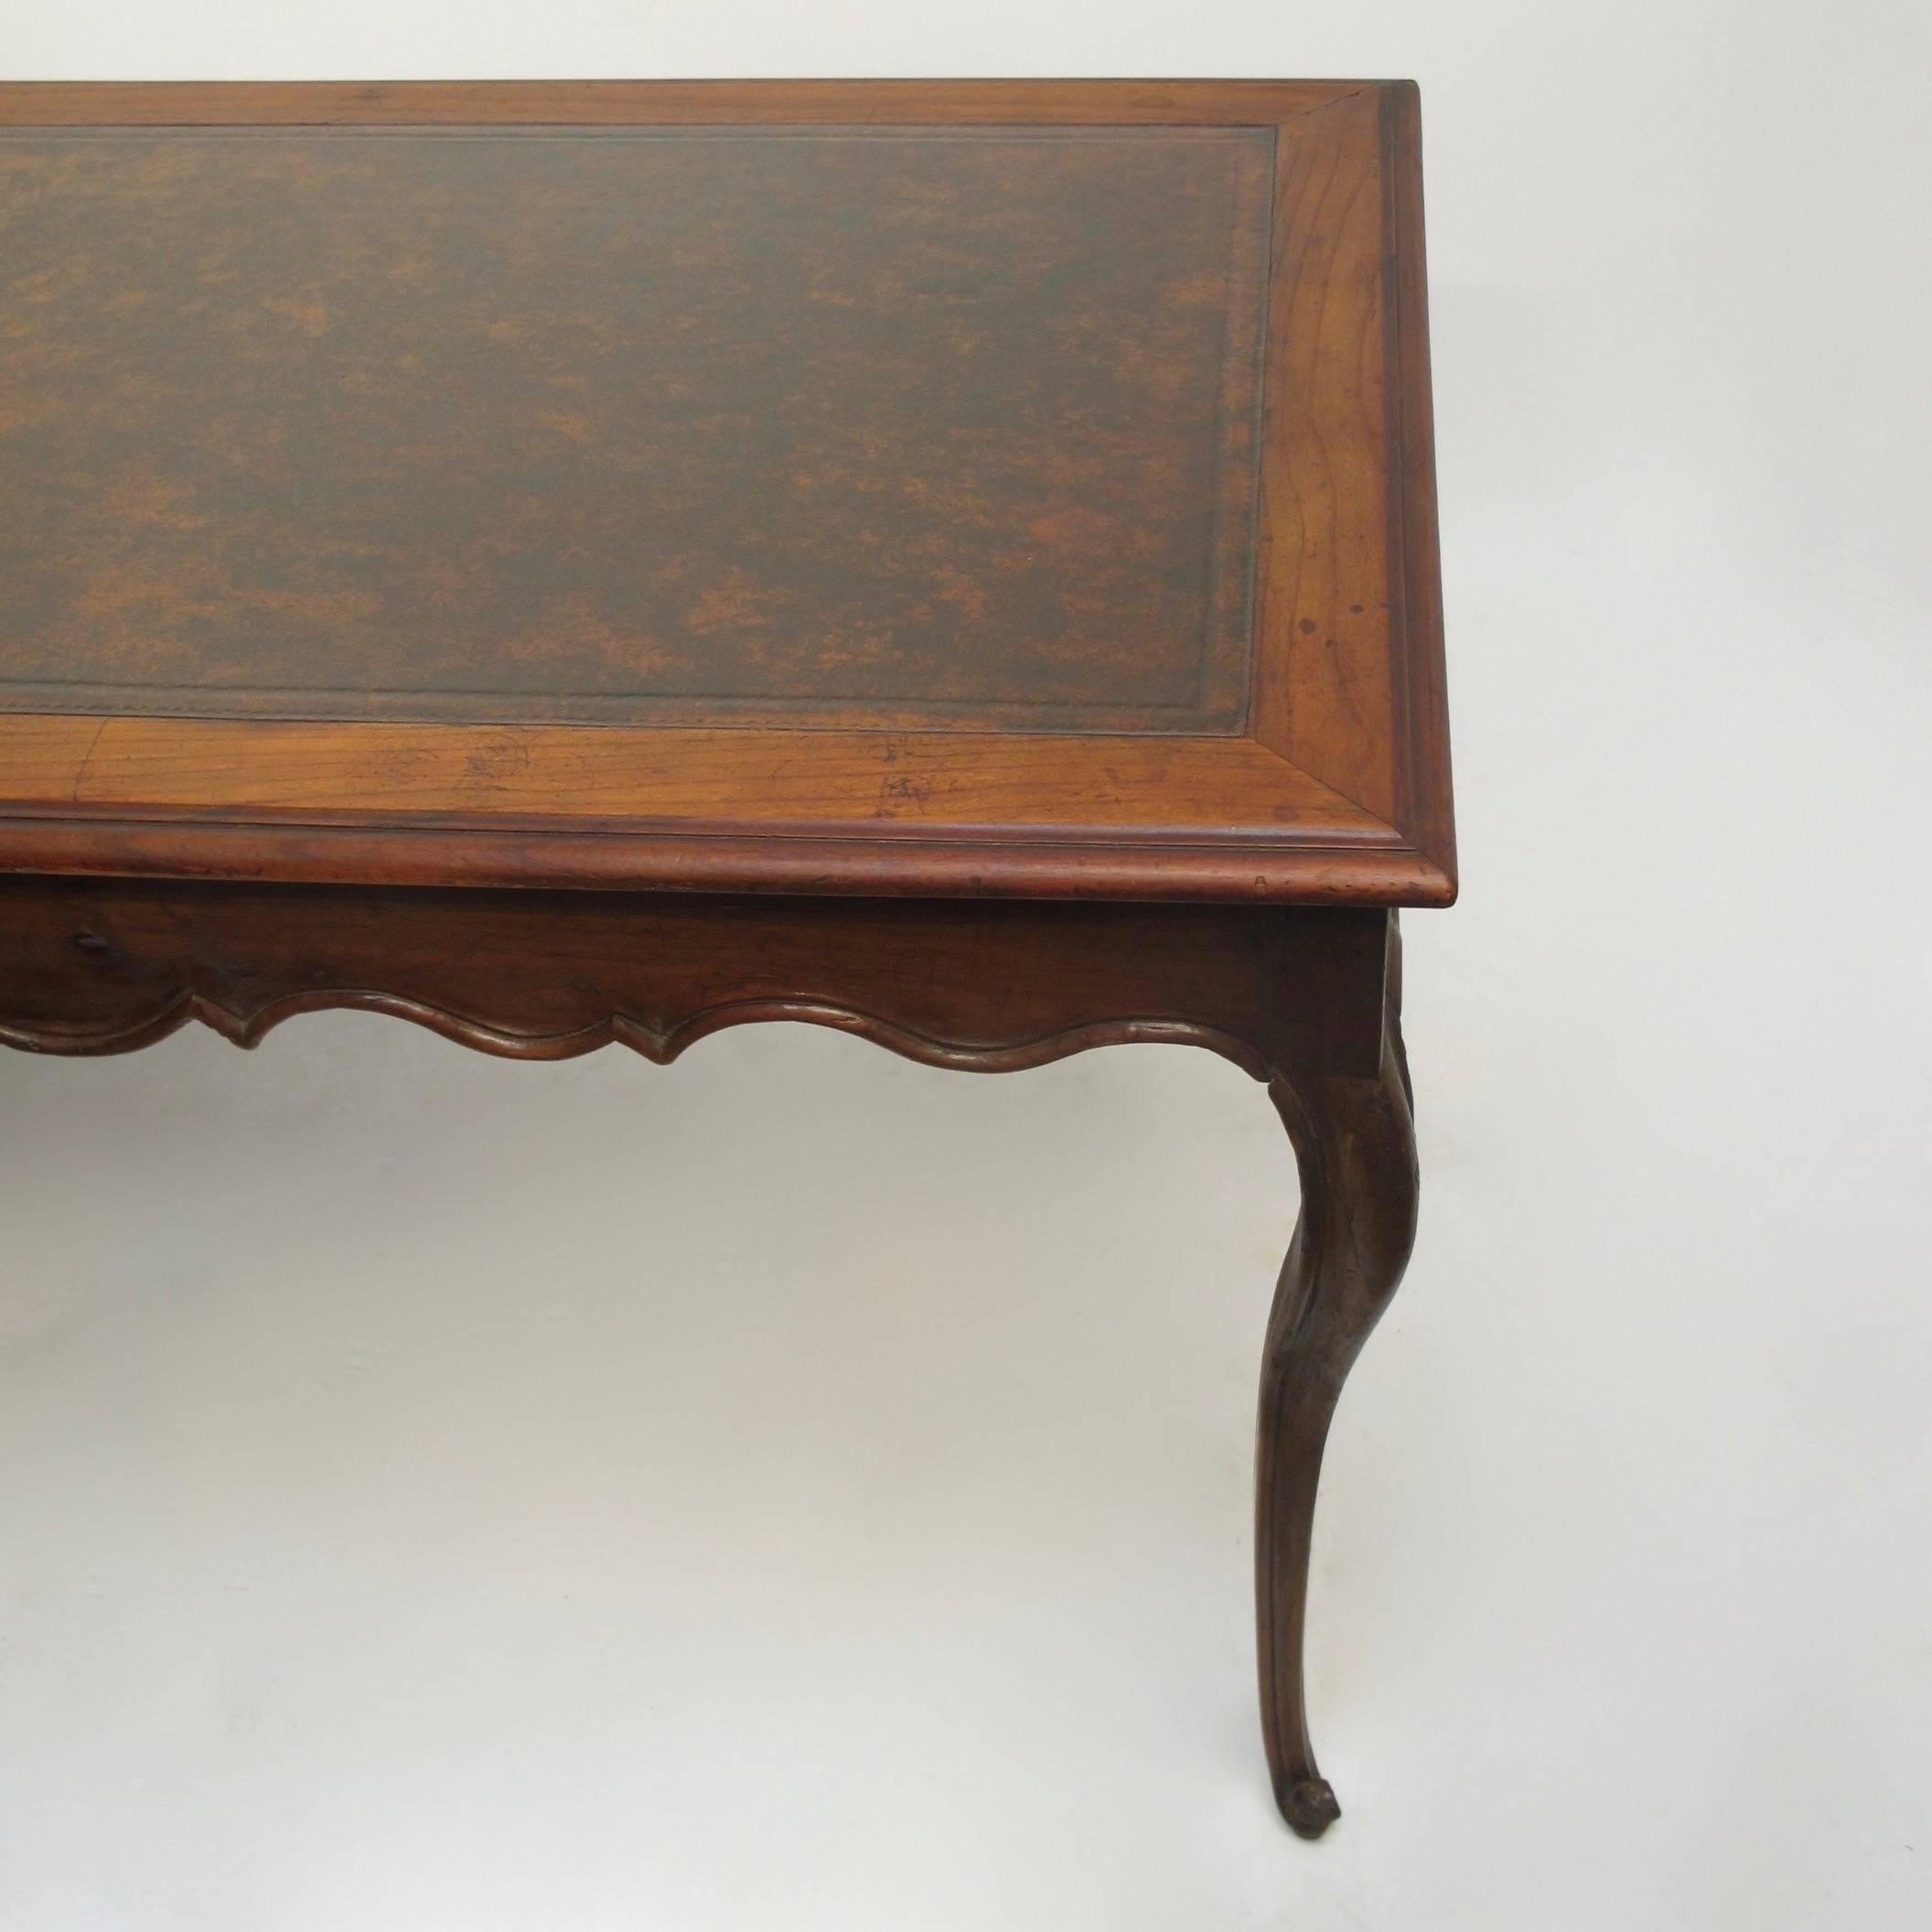 Carved Walnut Writing Table Desk with Inset Leather, French 18th Century